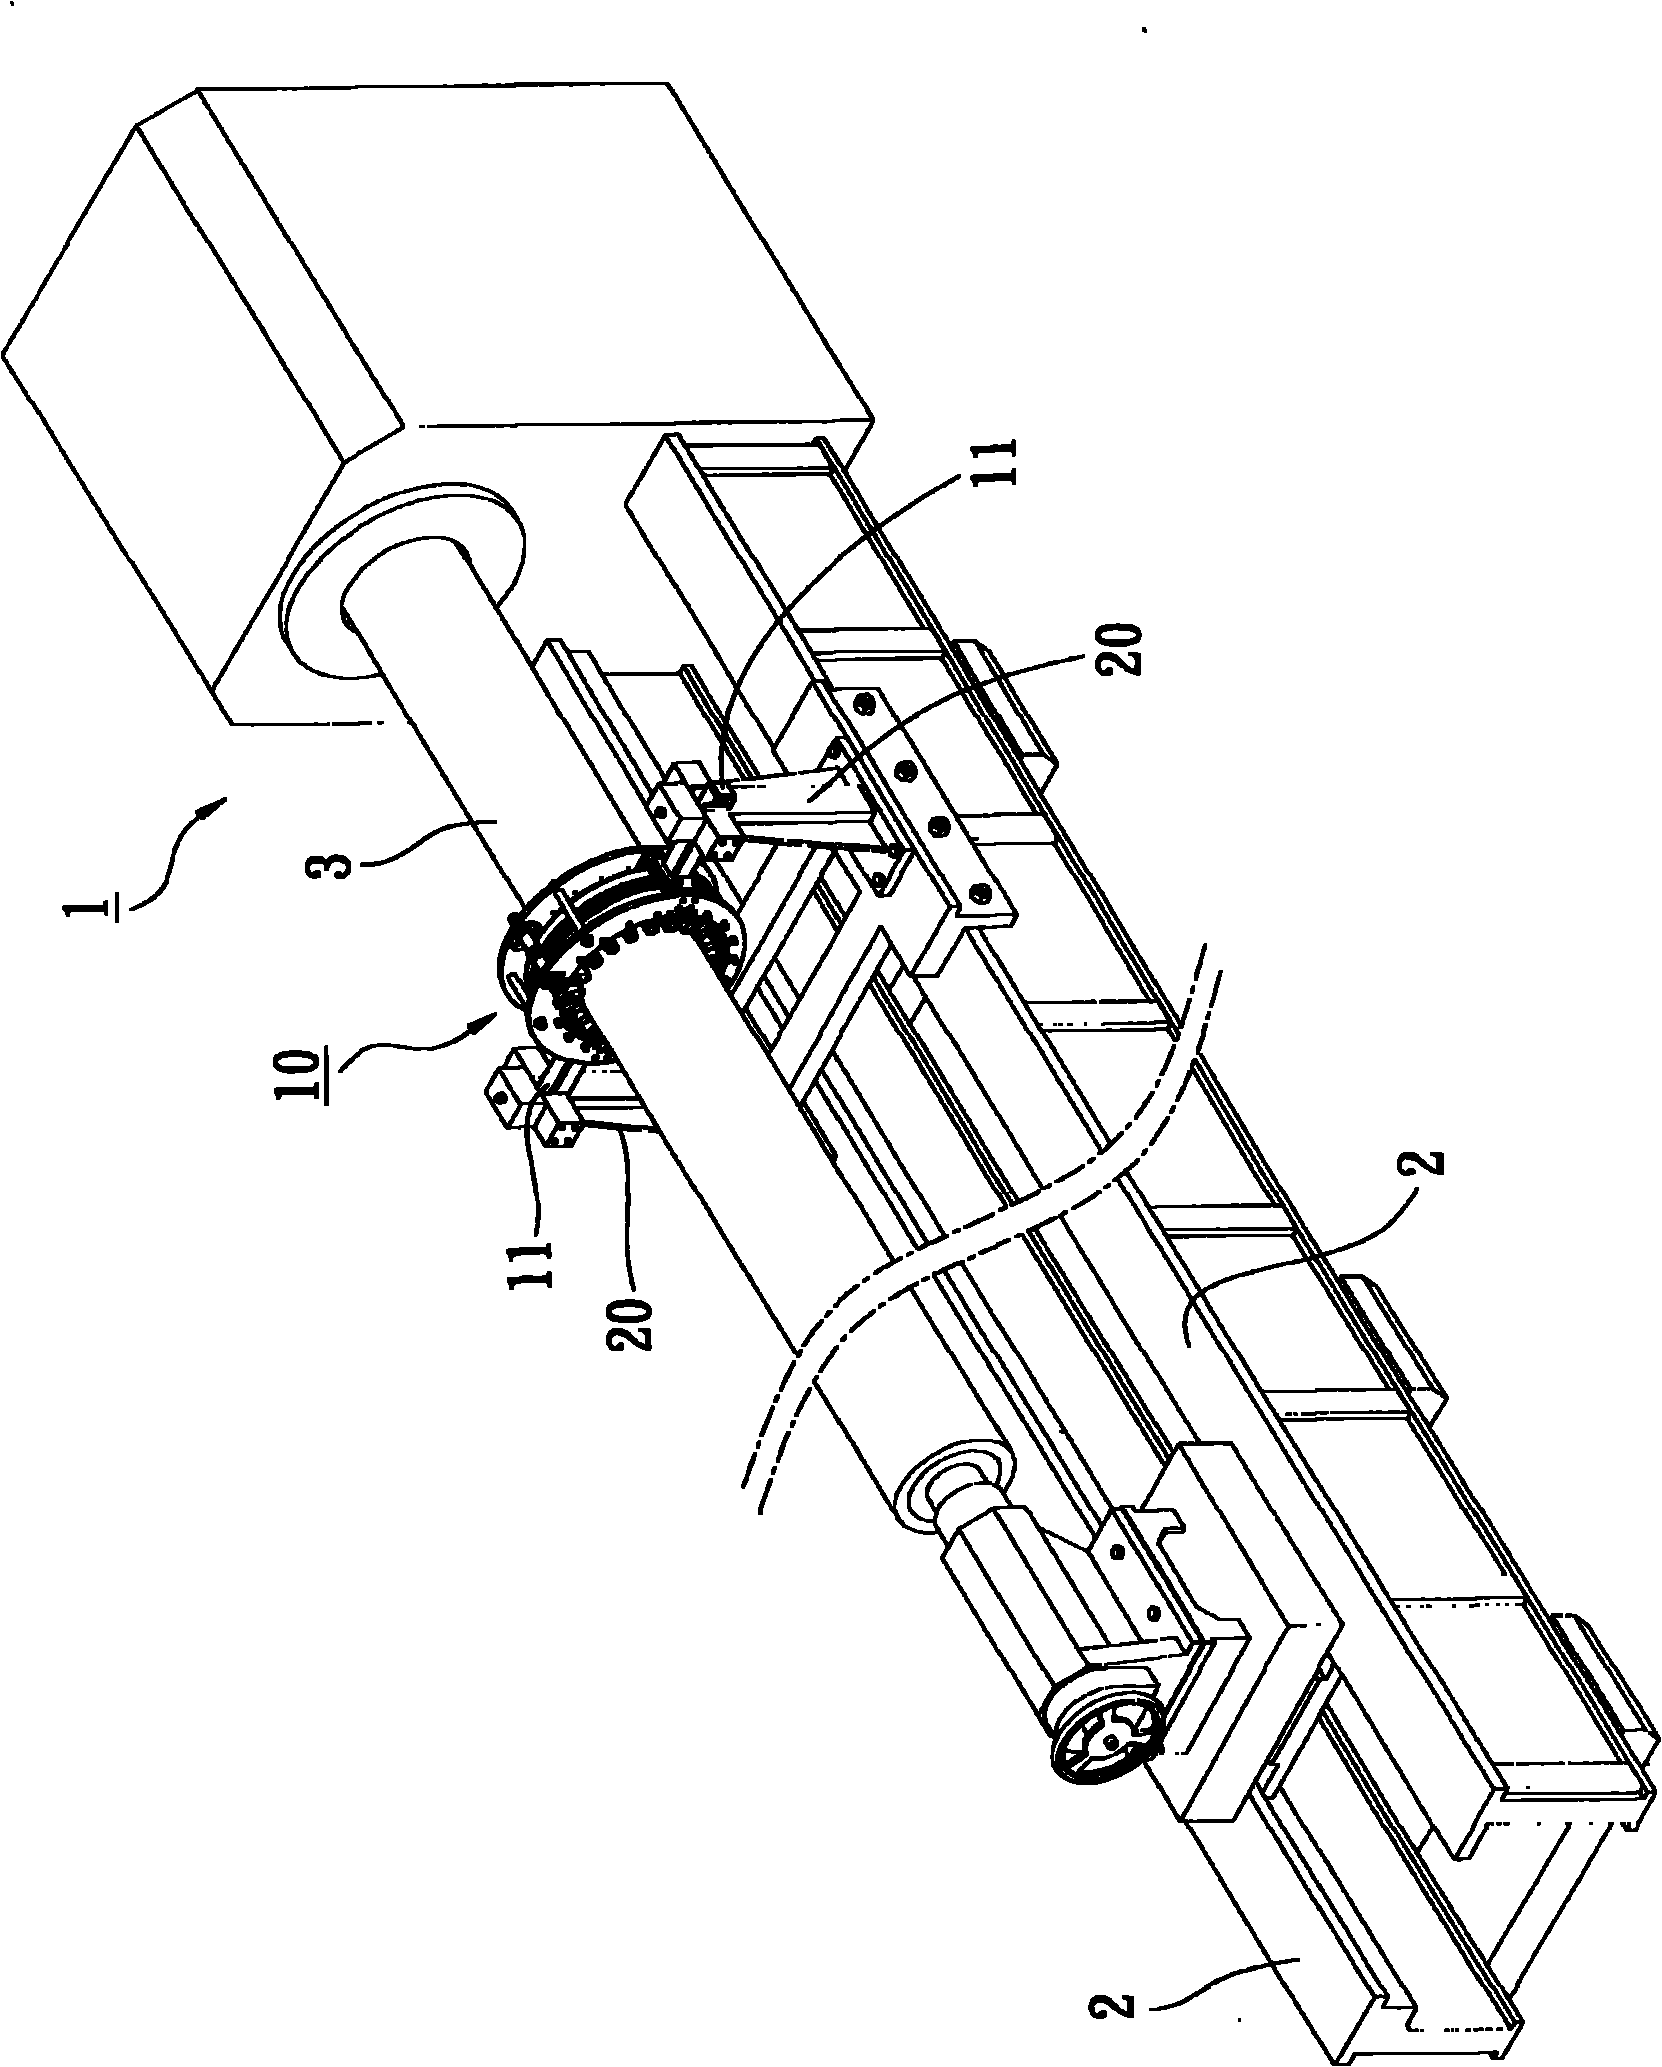 Multi-claw type external diameter grinding device